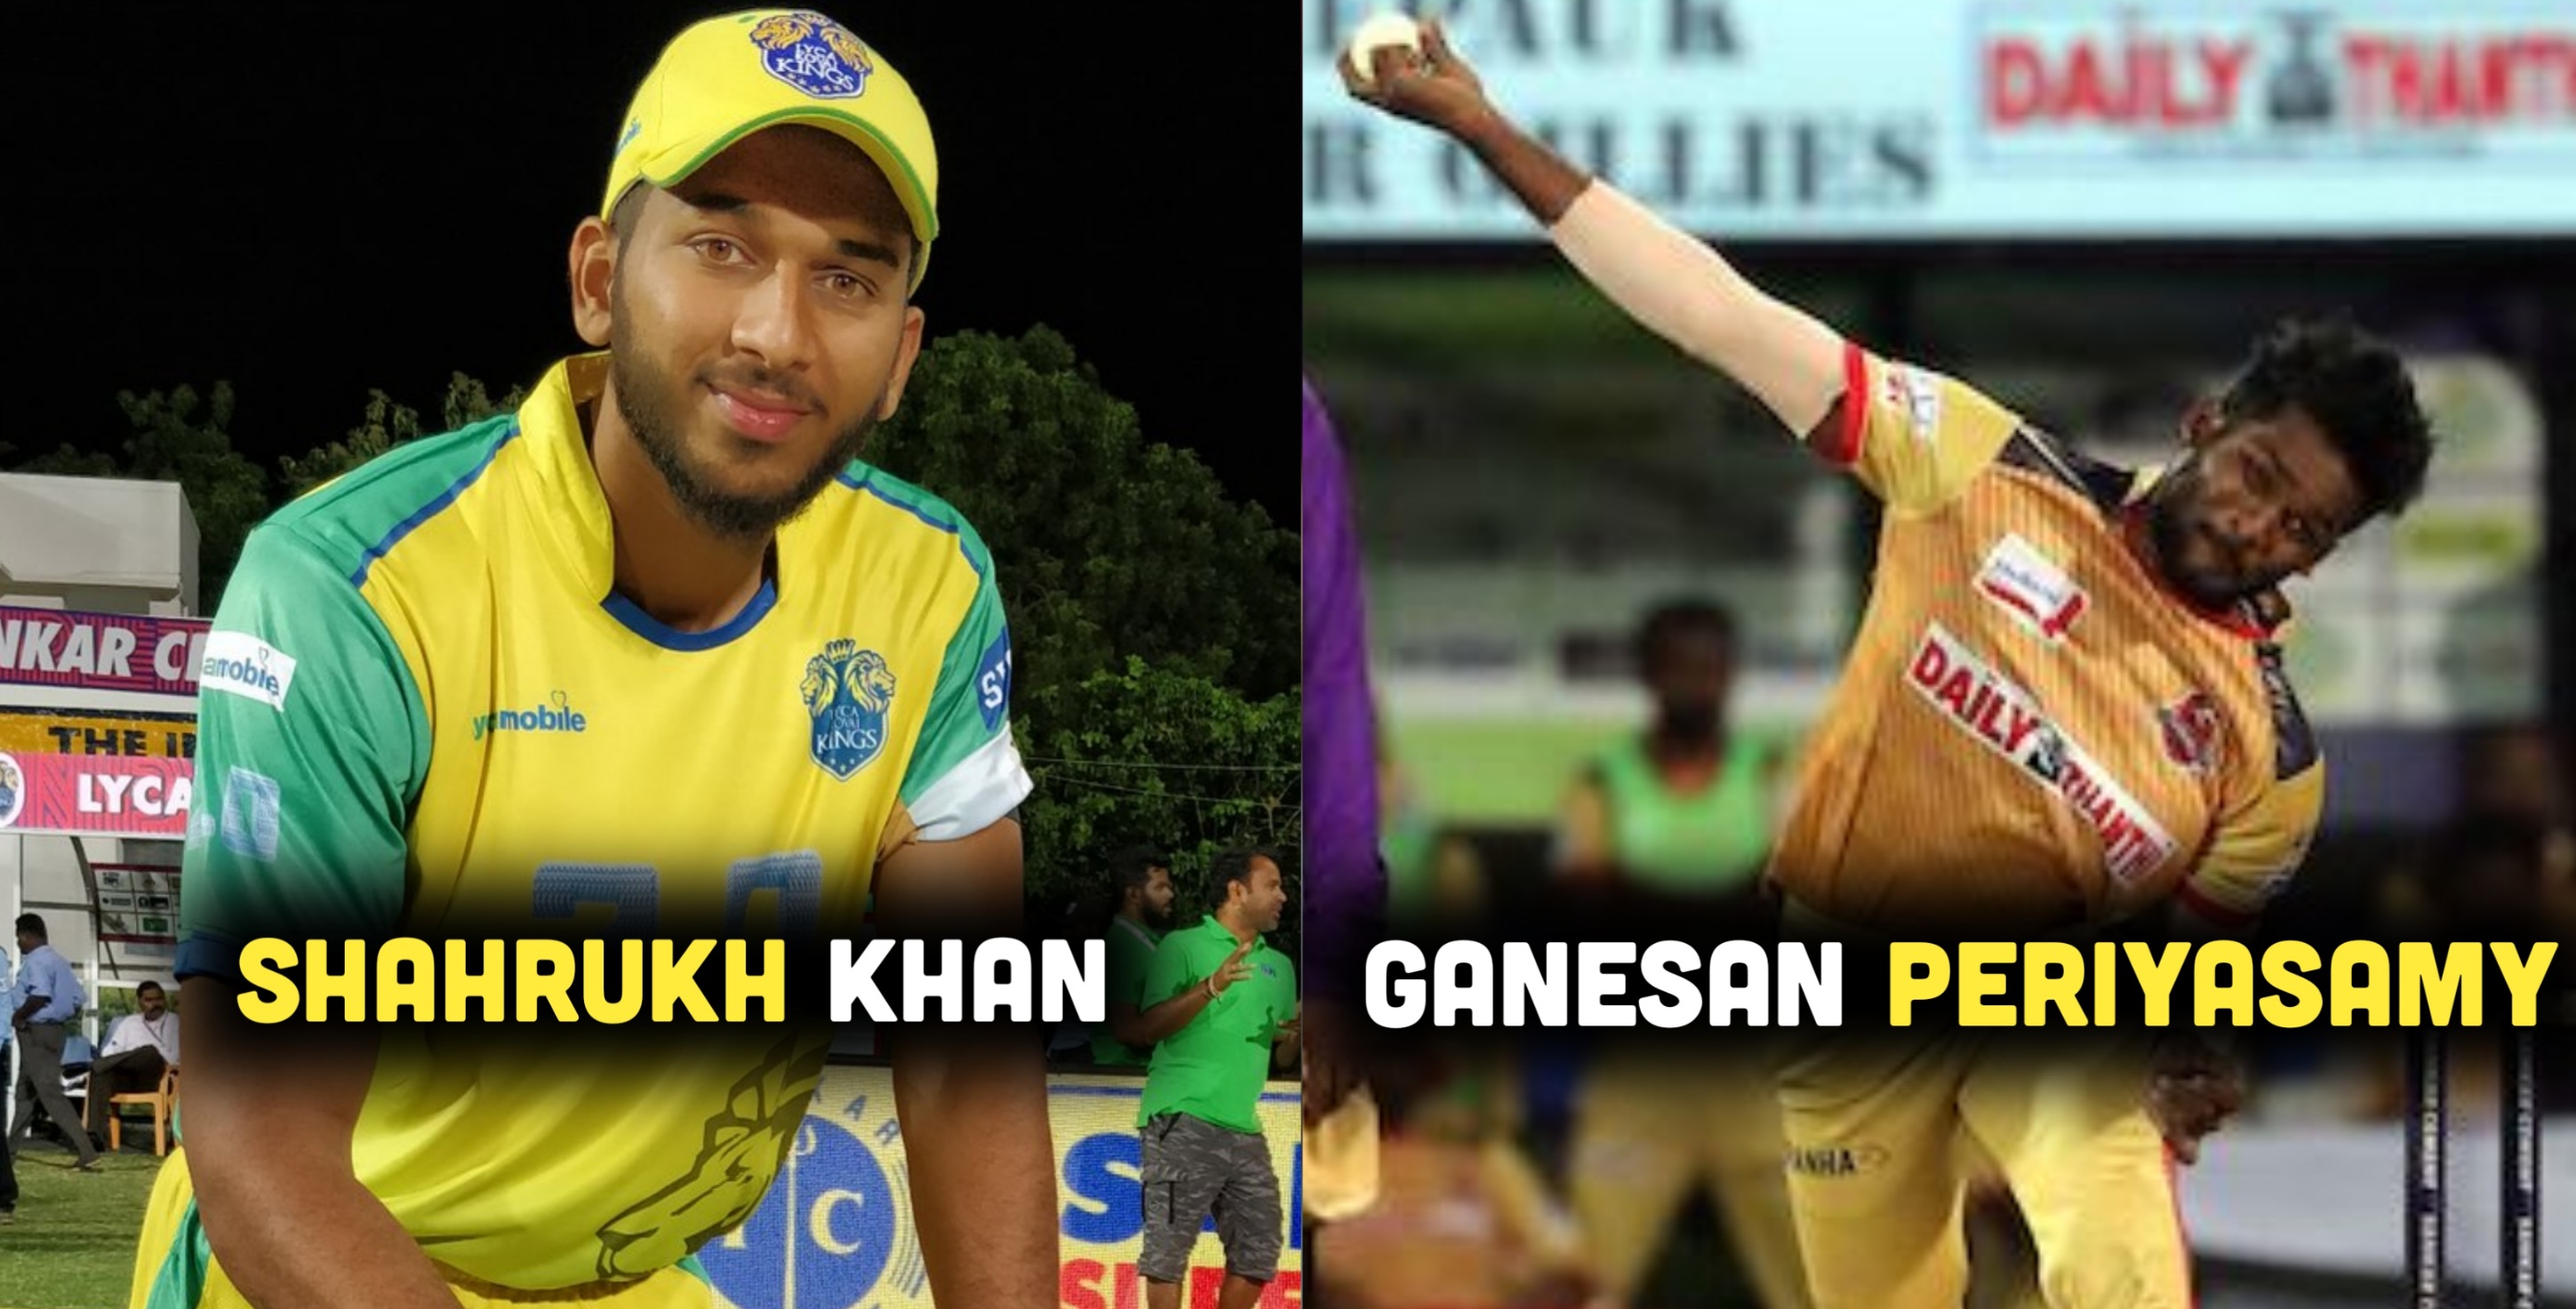 6 TNPL Players Who Could Have Fit Well In The CSK Playing XI